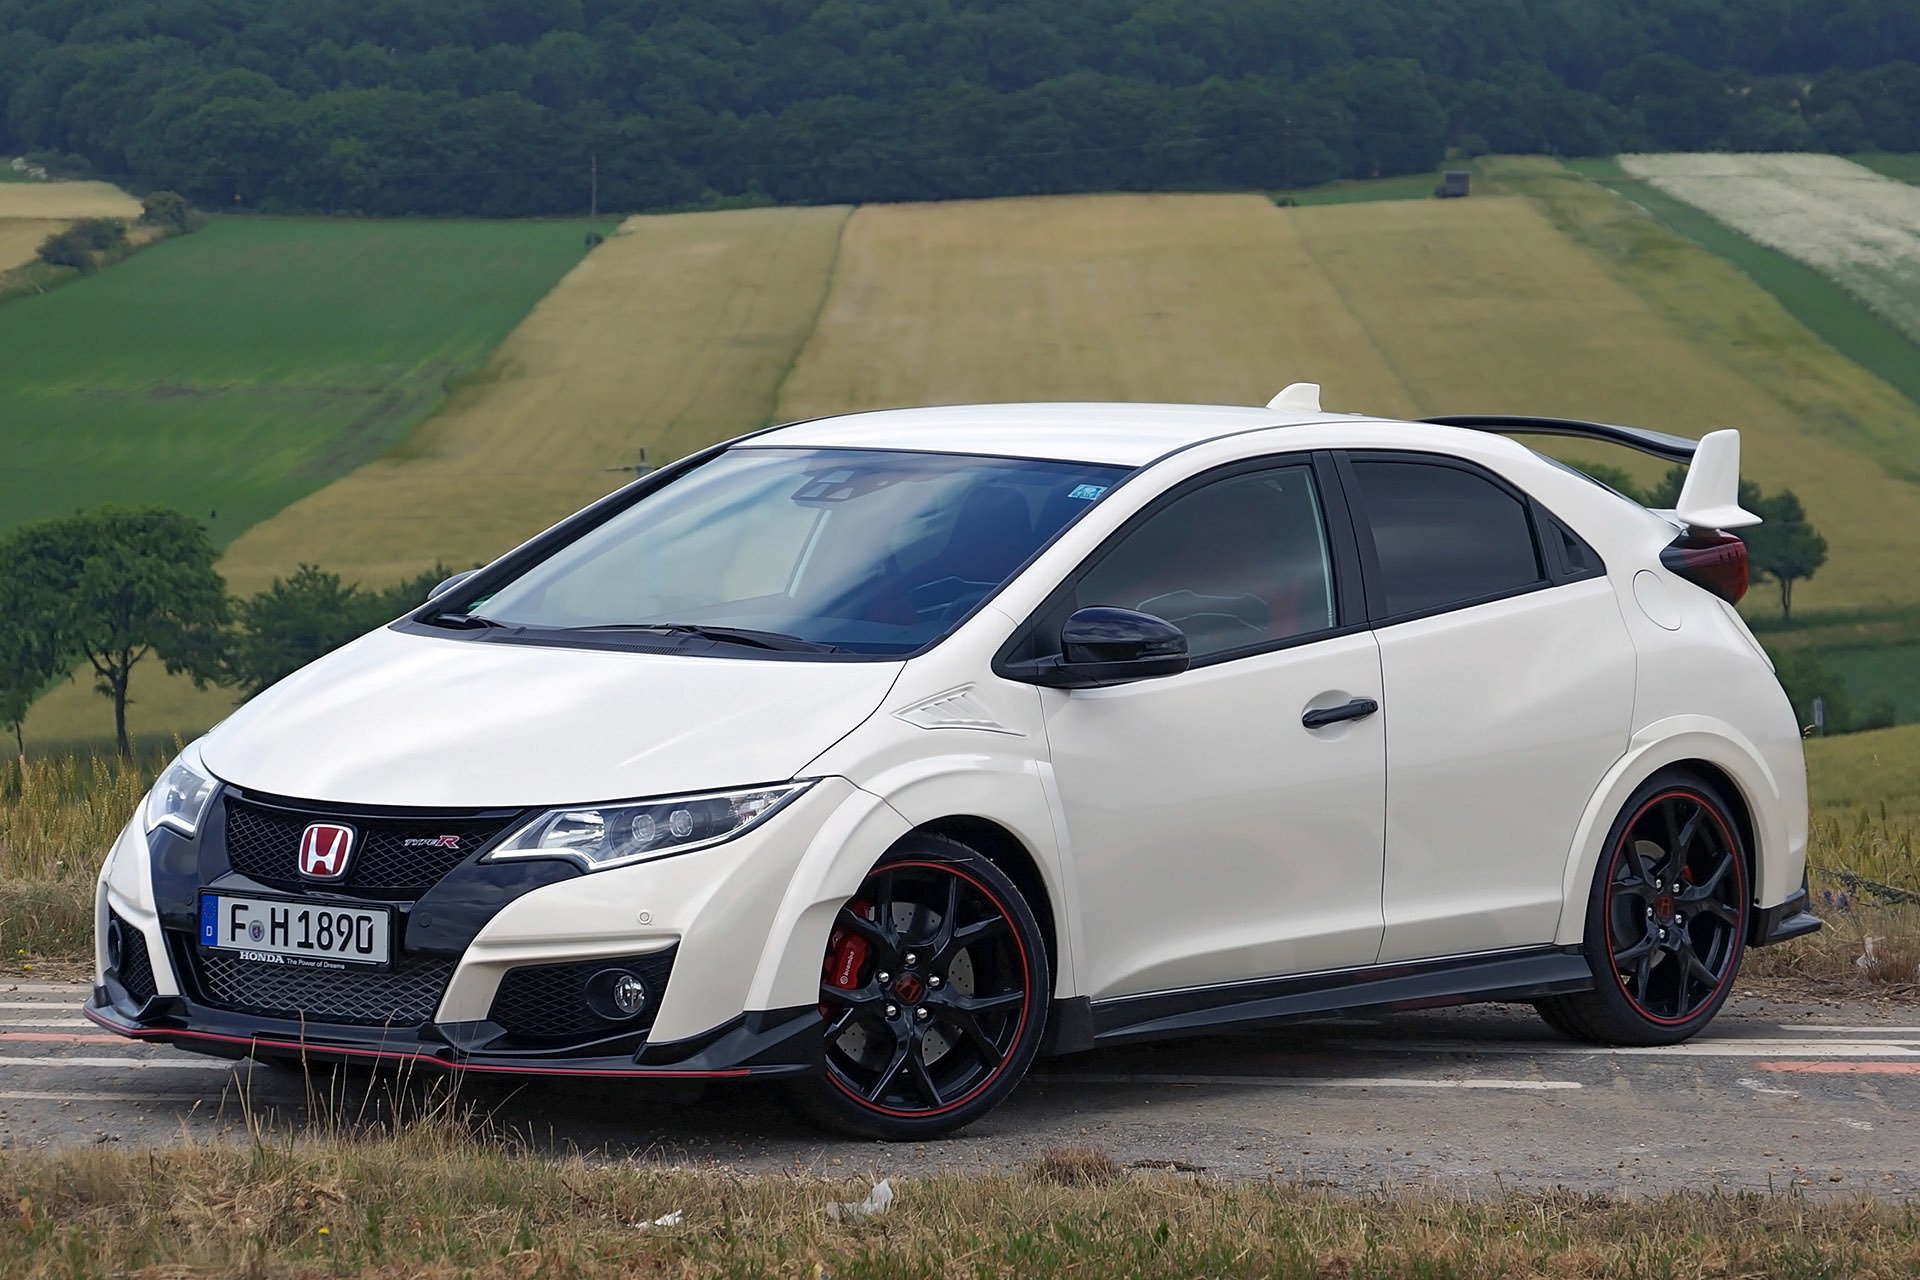 2015, Cars, Civic, Coupe, Honda, Type r, White Wallpapers